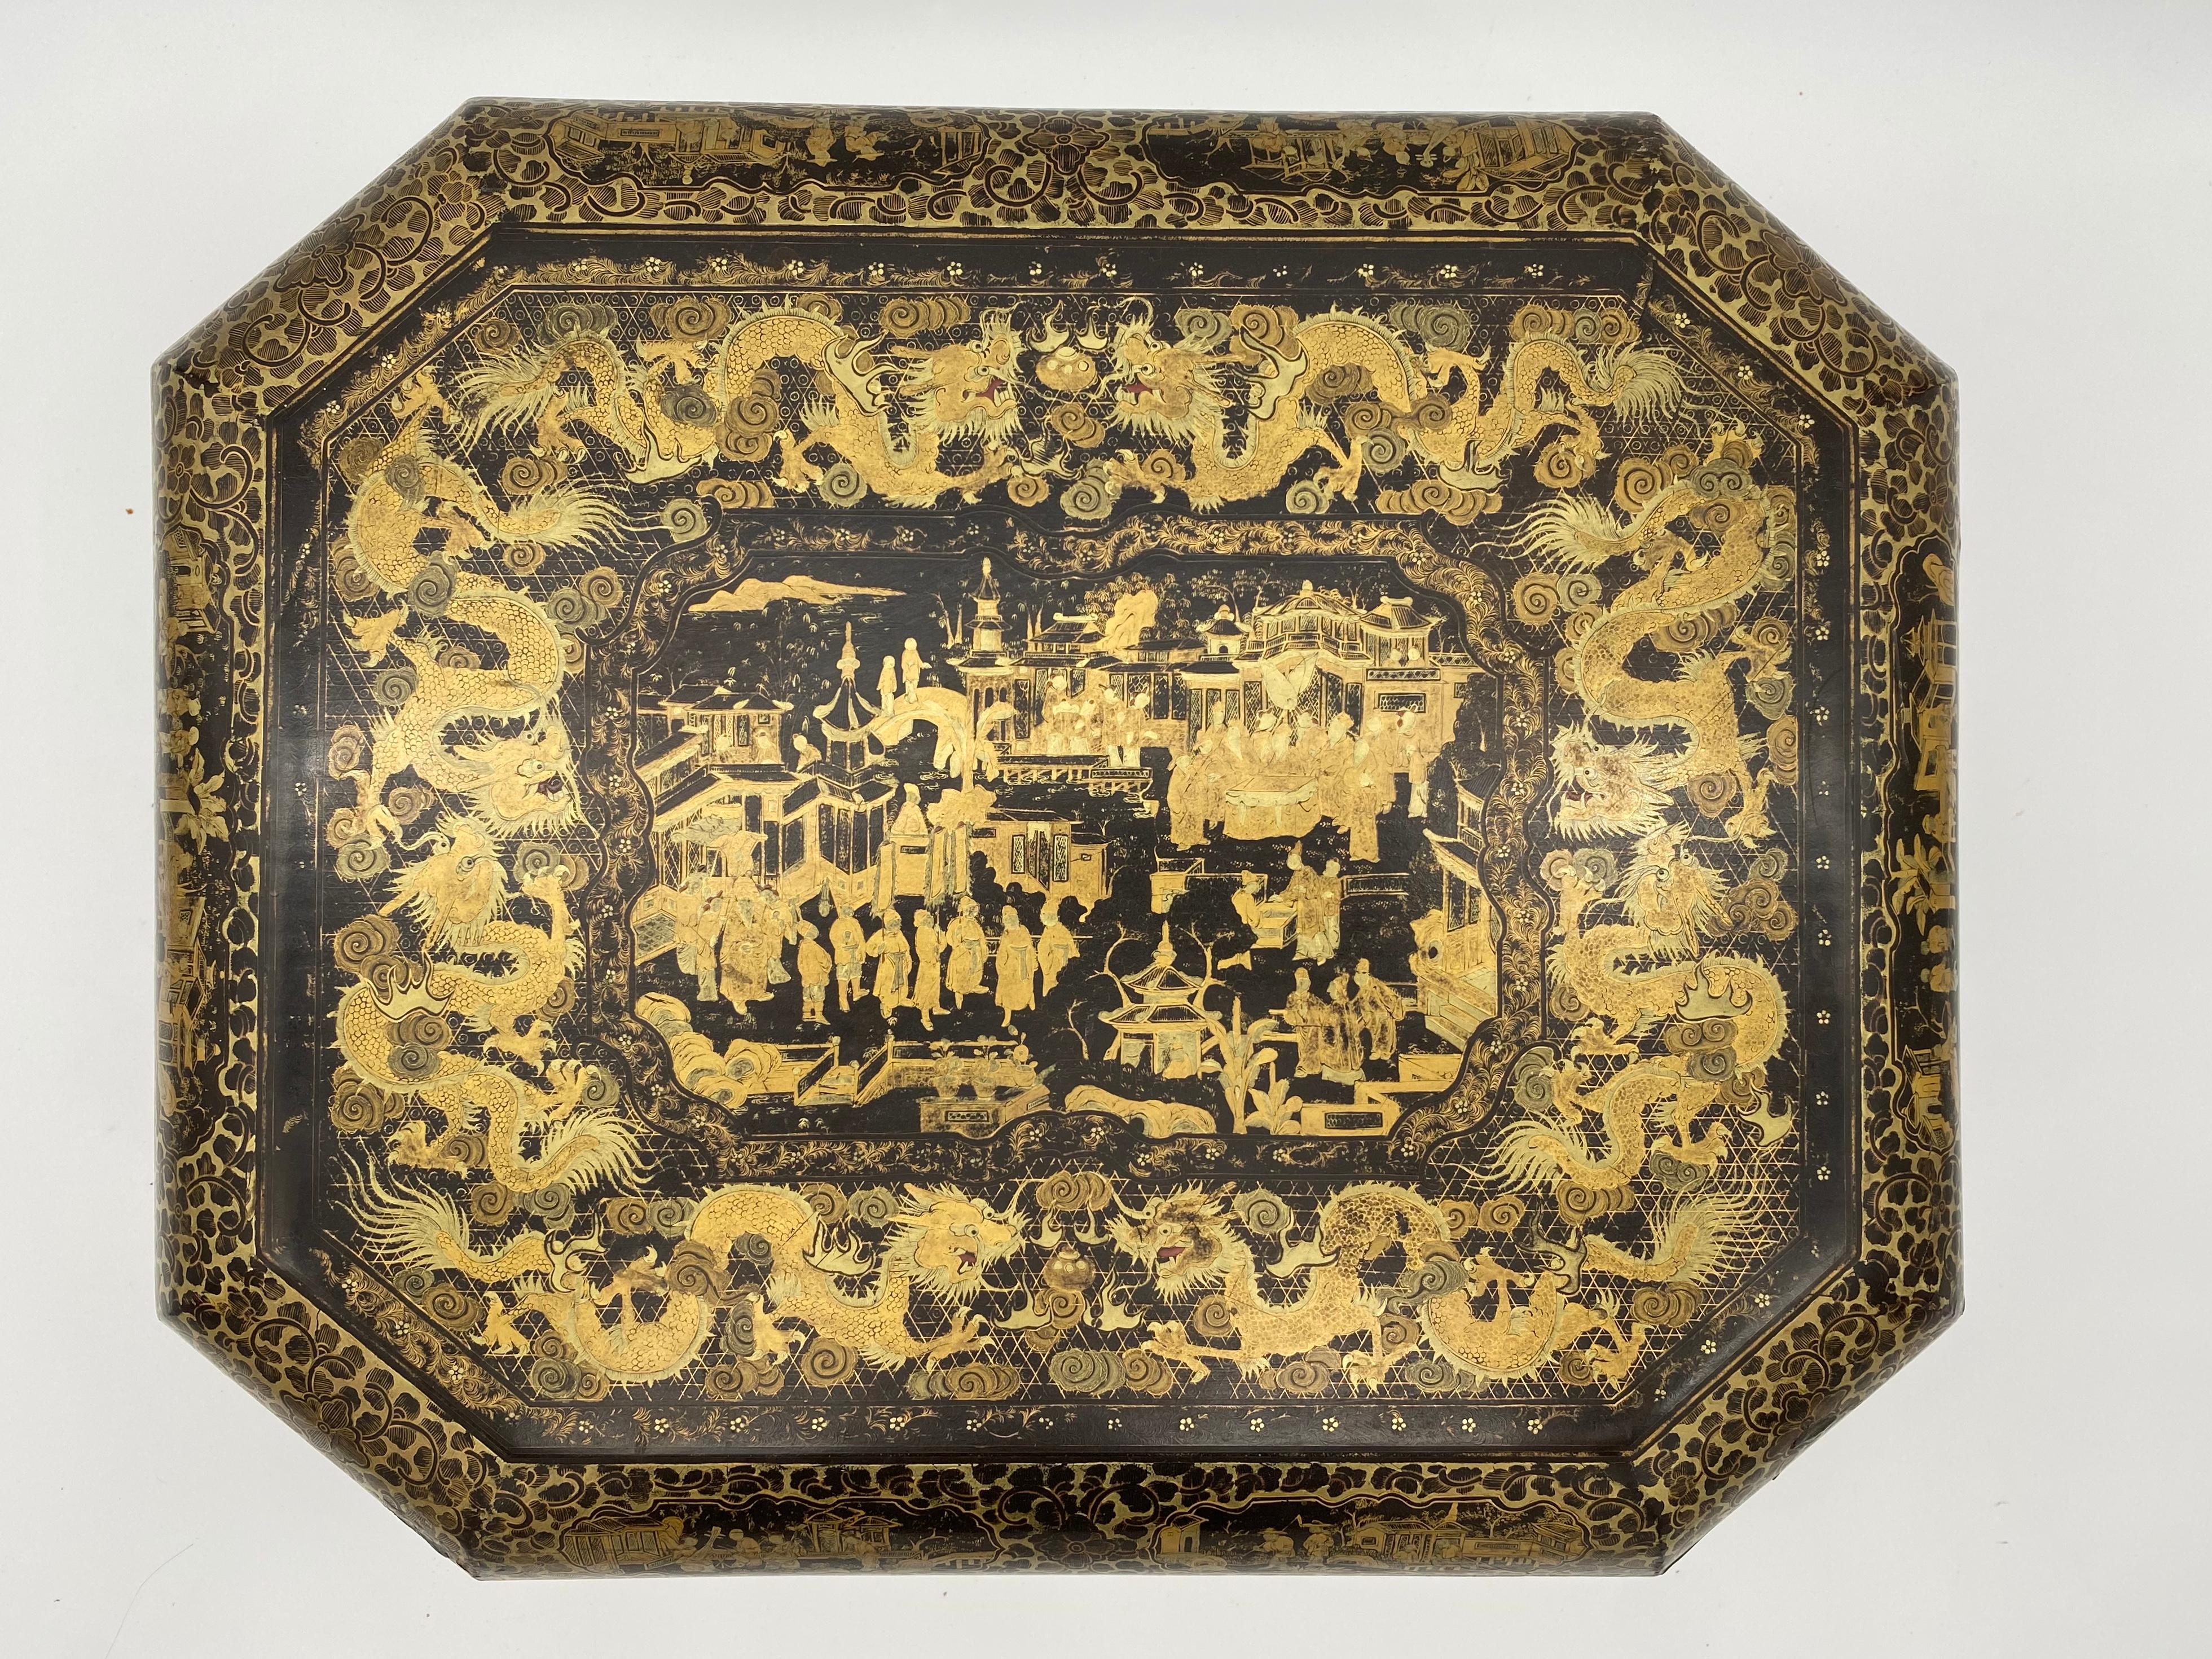 Antique 19th century export Chinese lacquer gaming box with hand painted scenes gilt export black lacquer with 4 pair of two dragons playing a ball, there are 7 gaming boxes and 12 trays, there are a gaming card and a receipt from 06-04-1974, 15